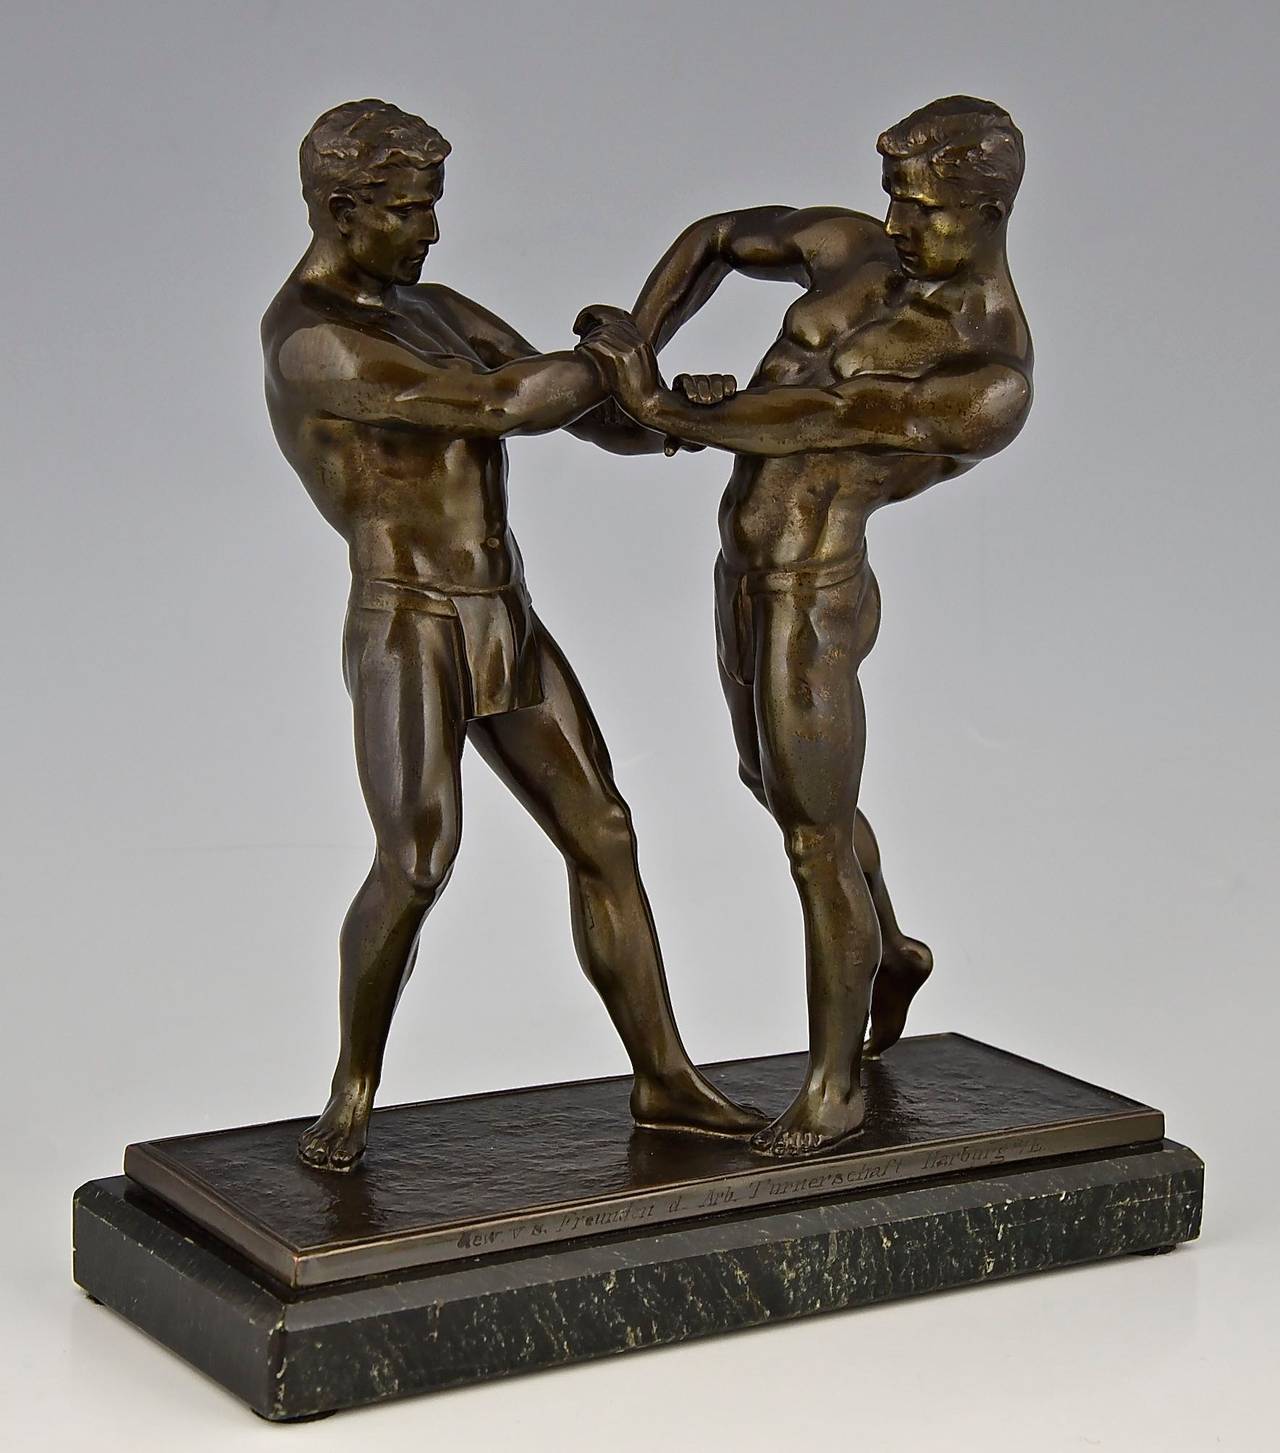 Sculpture of two wrestlers. 
Date:  1910.		
Material: Patinated metal.  Marble base. 	
Origin:  Germany.			
Size:			 
 H. 9.3 inch x L. 8.5 inch x W. 3.3 inch. 
H. 23.5 cm. x L. 21.5 cm. x W. 8.5 cm. 
Condition:  Good original condition.